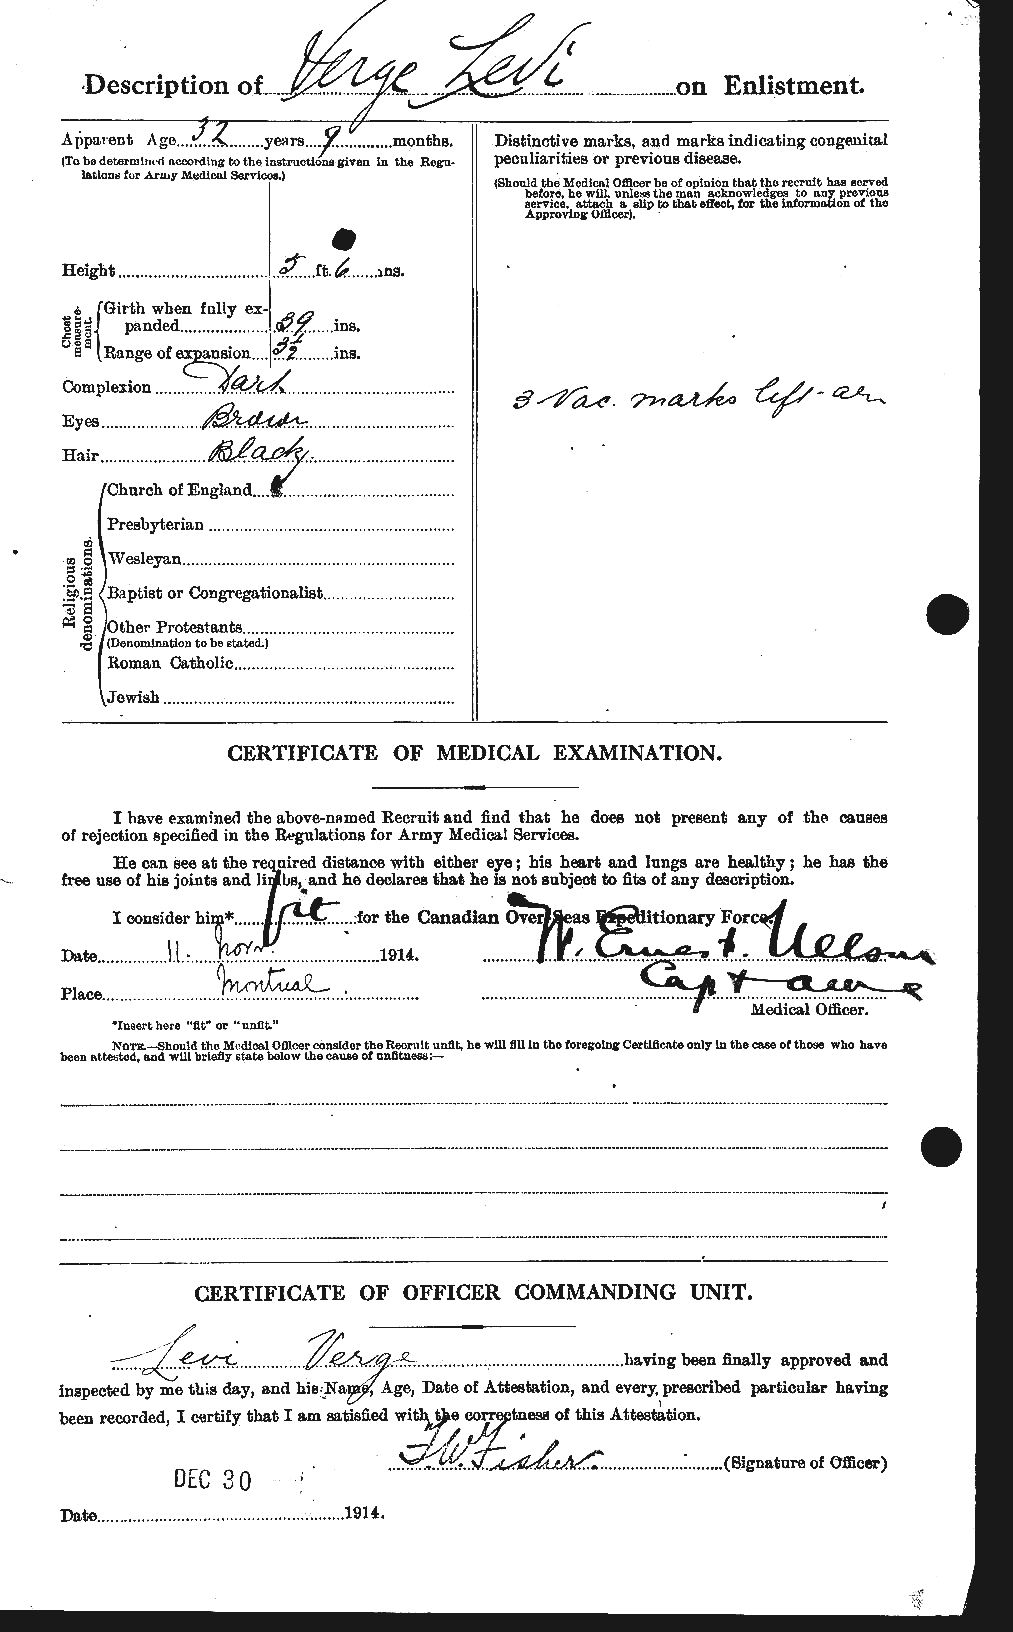 Personnel Records of the First World War - CEF 649468b